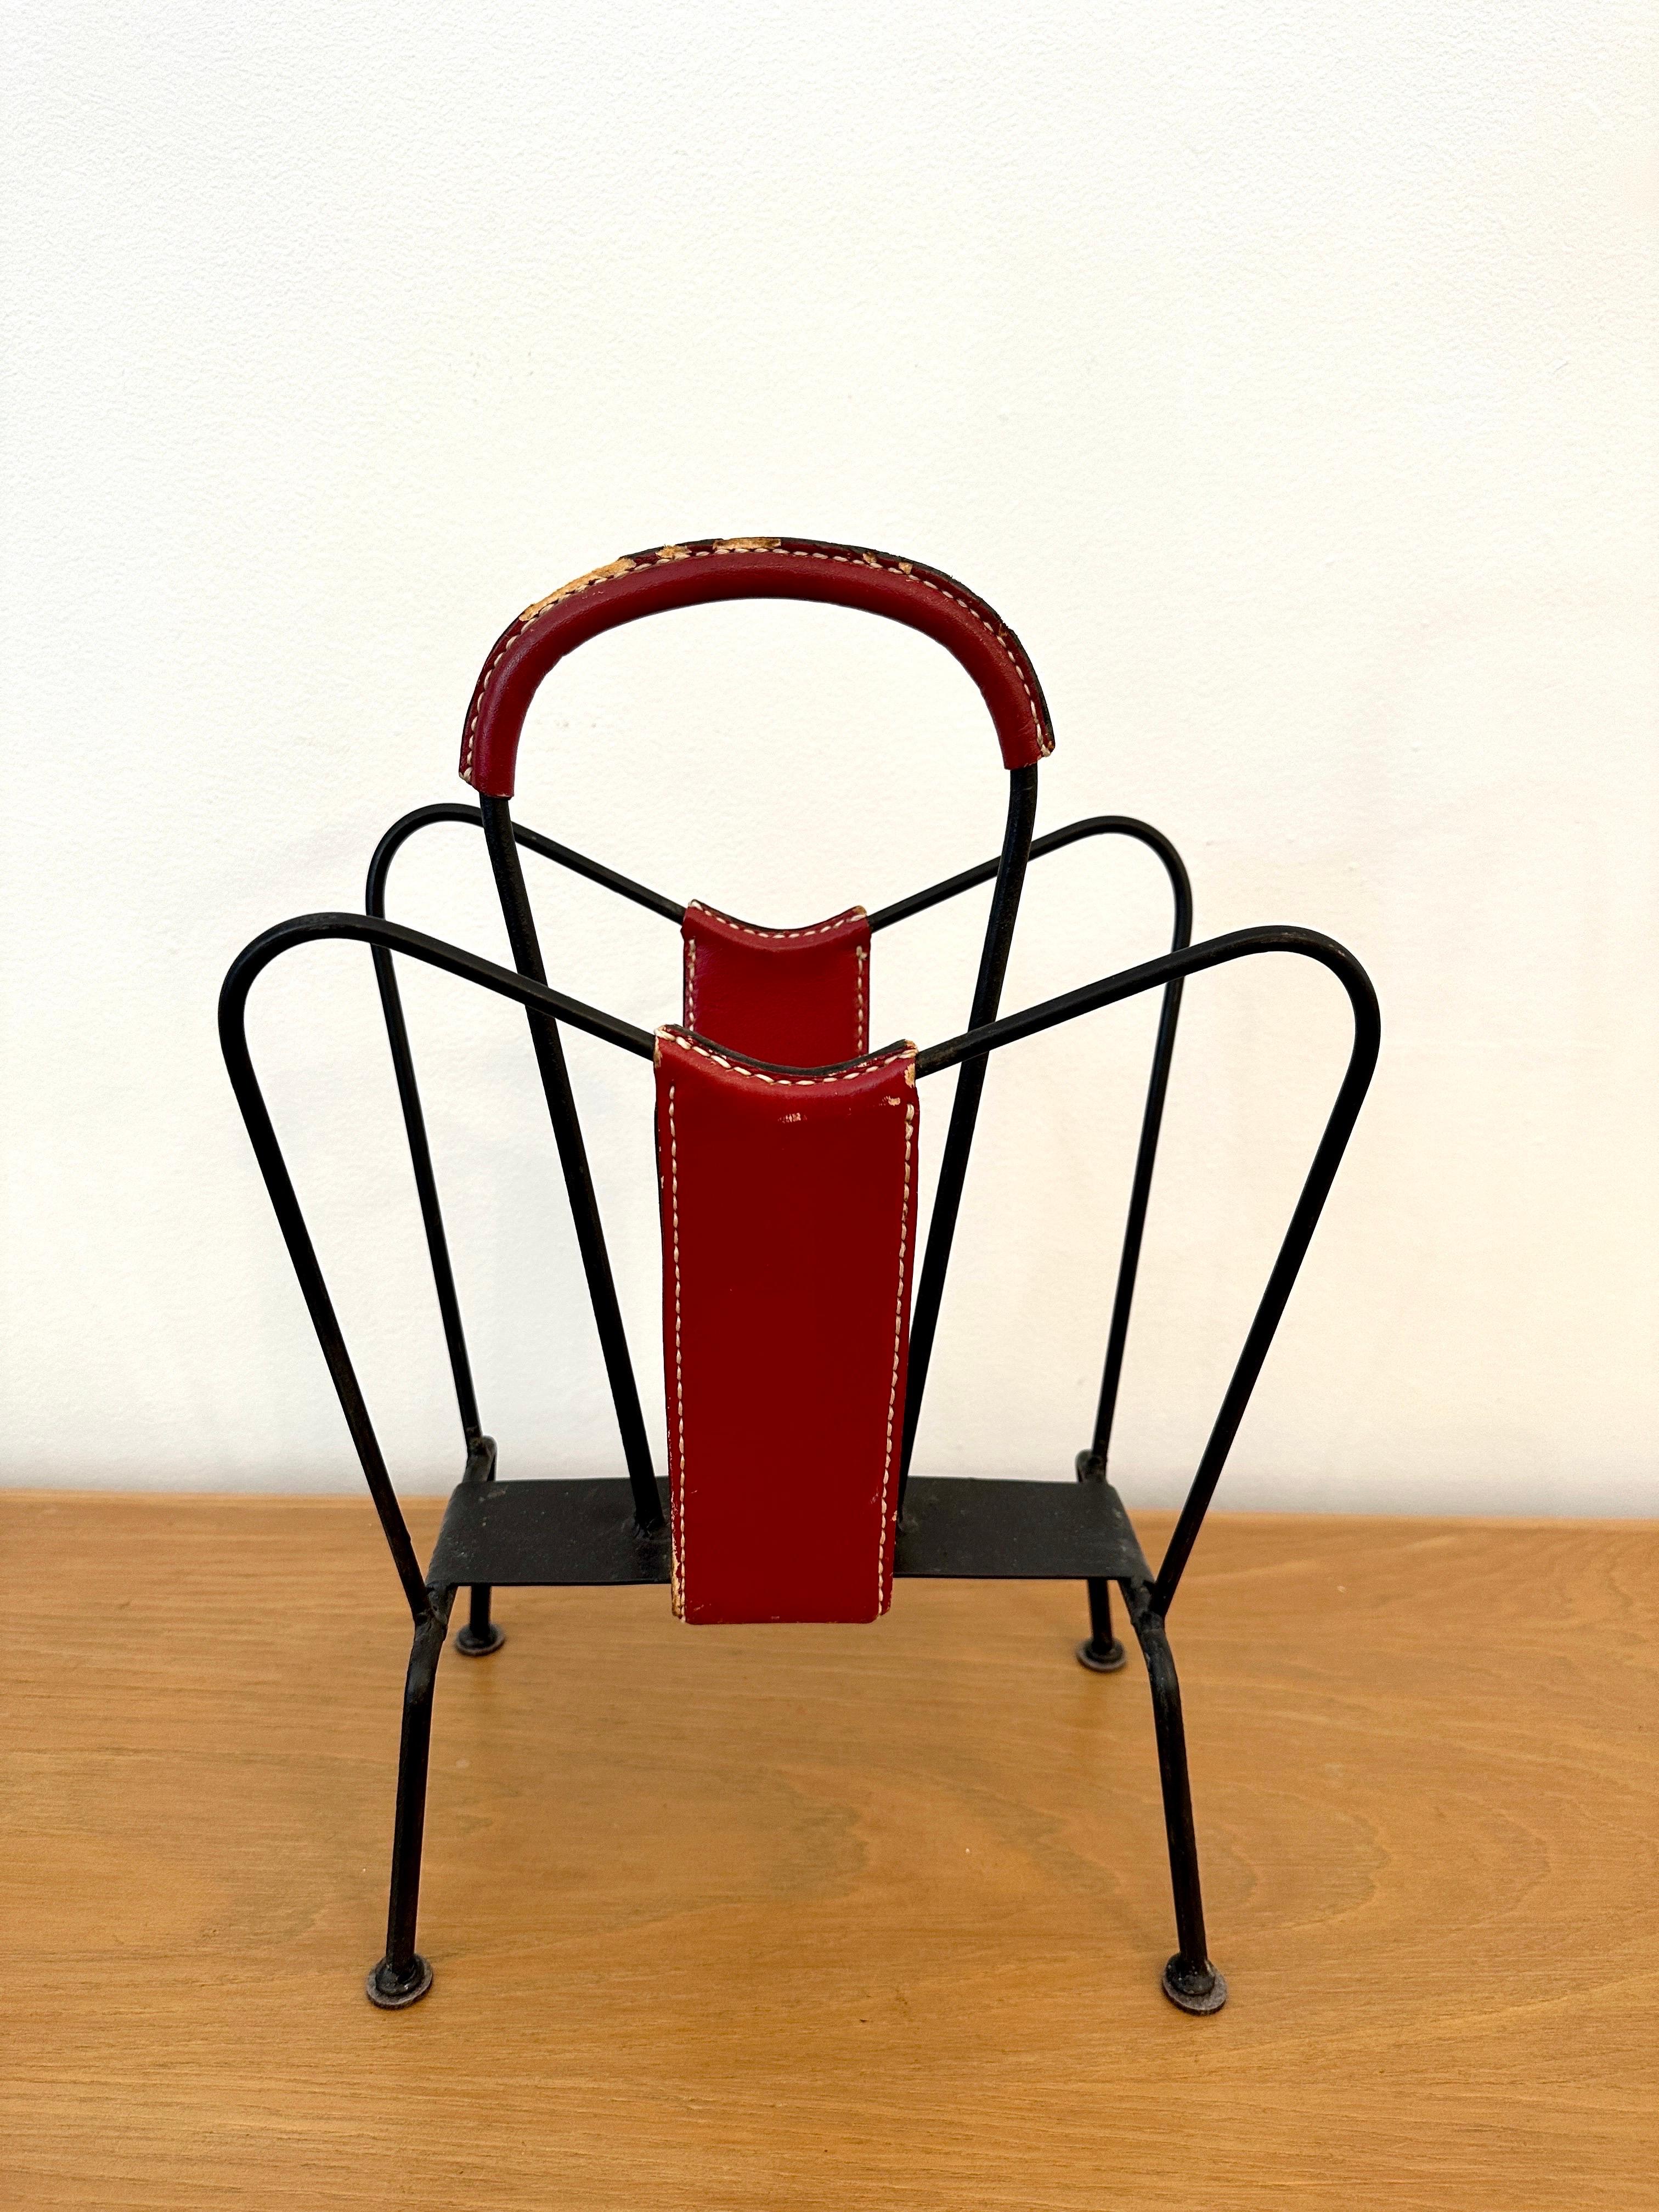 Magazine stand designed by Jacques Adnet and manufactured in his own atelier, France, 1950. The magazine stand has a solid frame and is accented by handstitched red leather. The stand has a nice patina from age and usage, and is fully in original